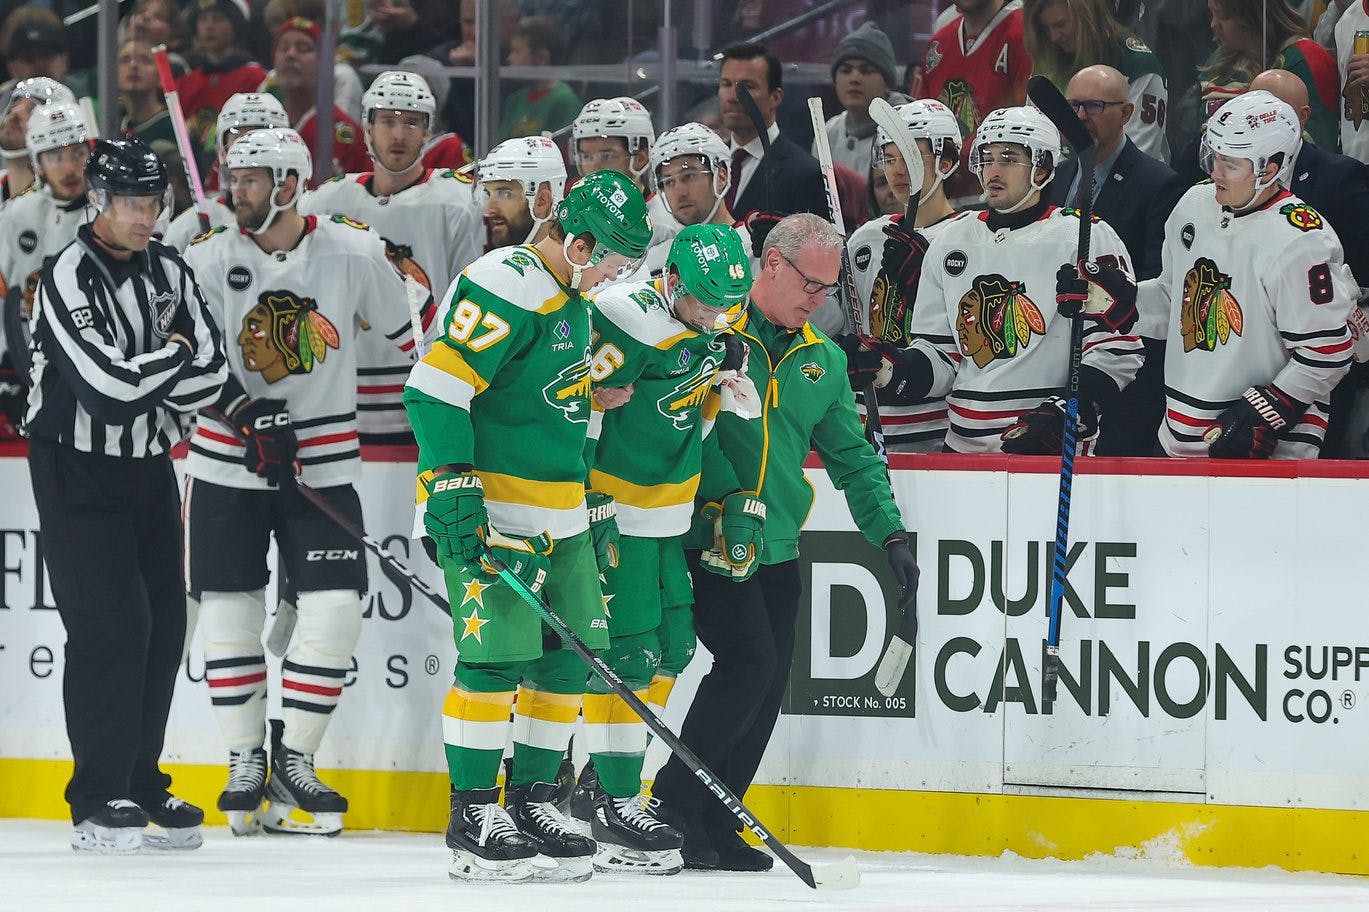 Injuries piling up for the Minnesota Wild as they look to stay in the playoff race